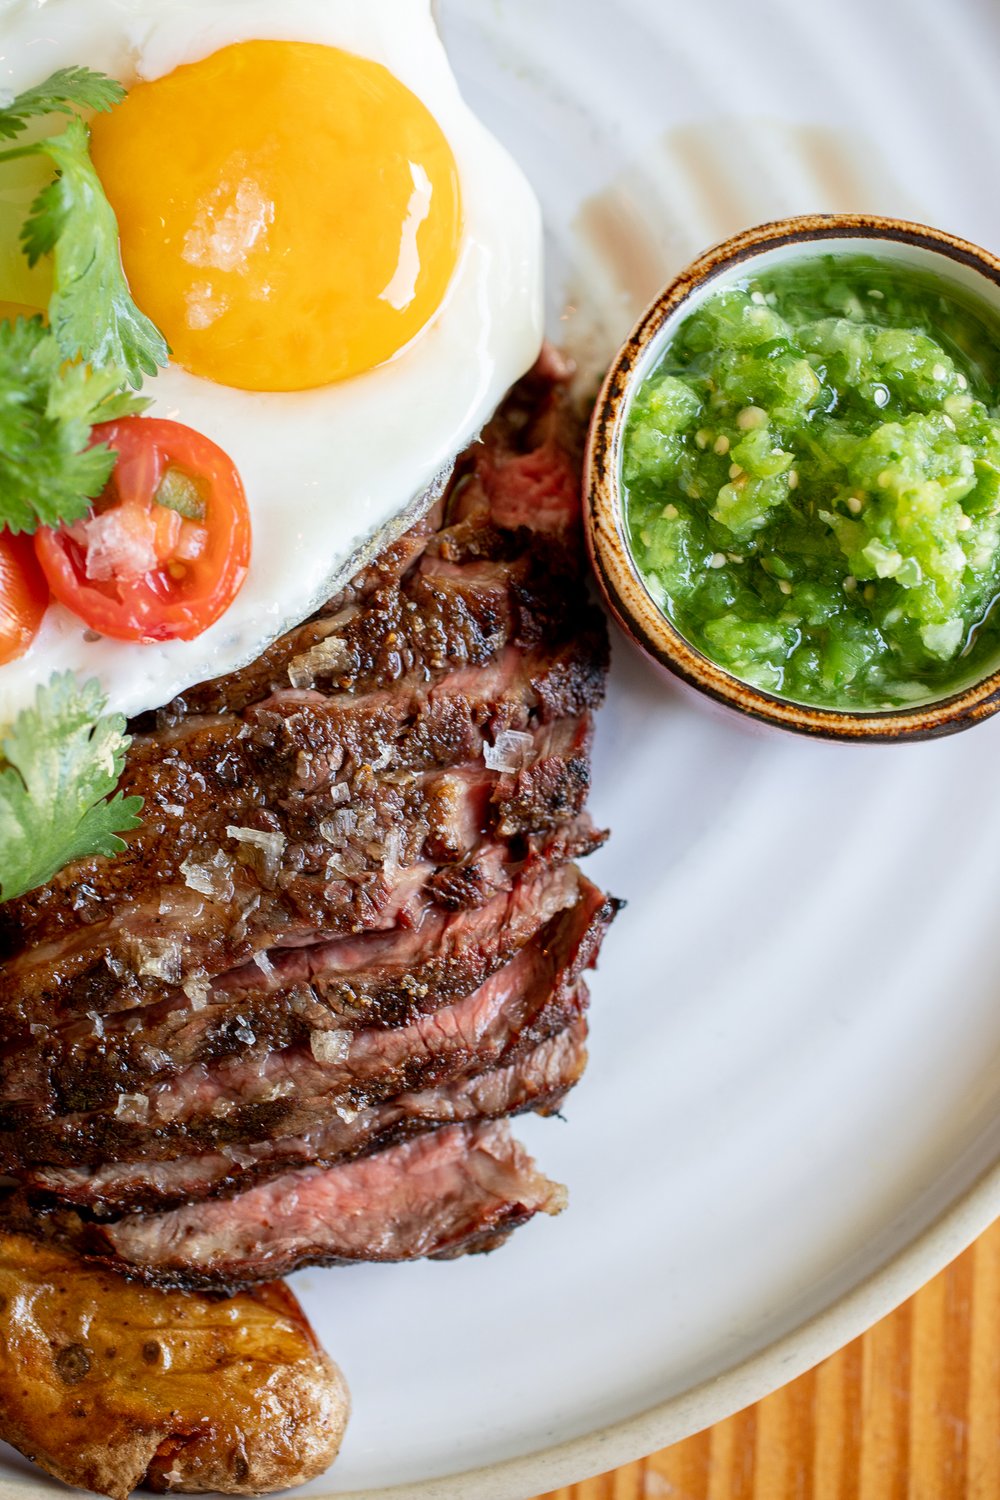 Pan-seared Steak and Egg. Photo credit: Andrew Reiner